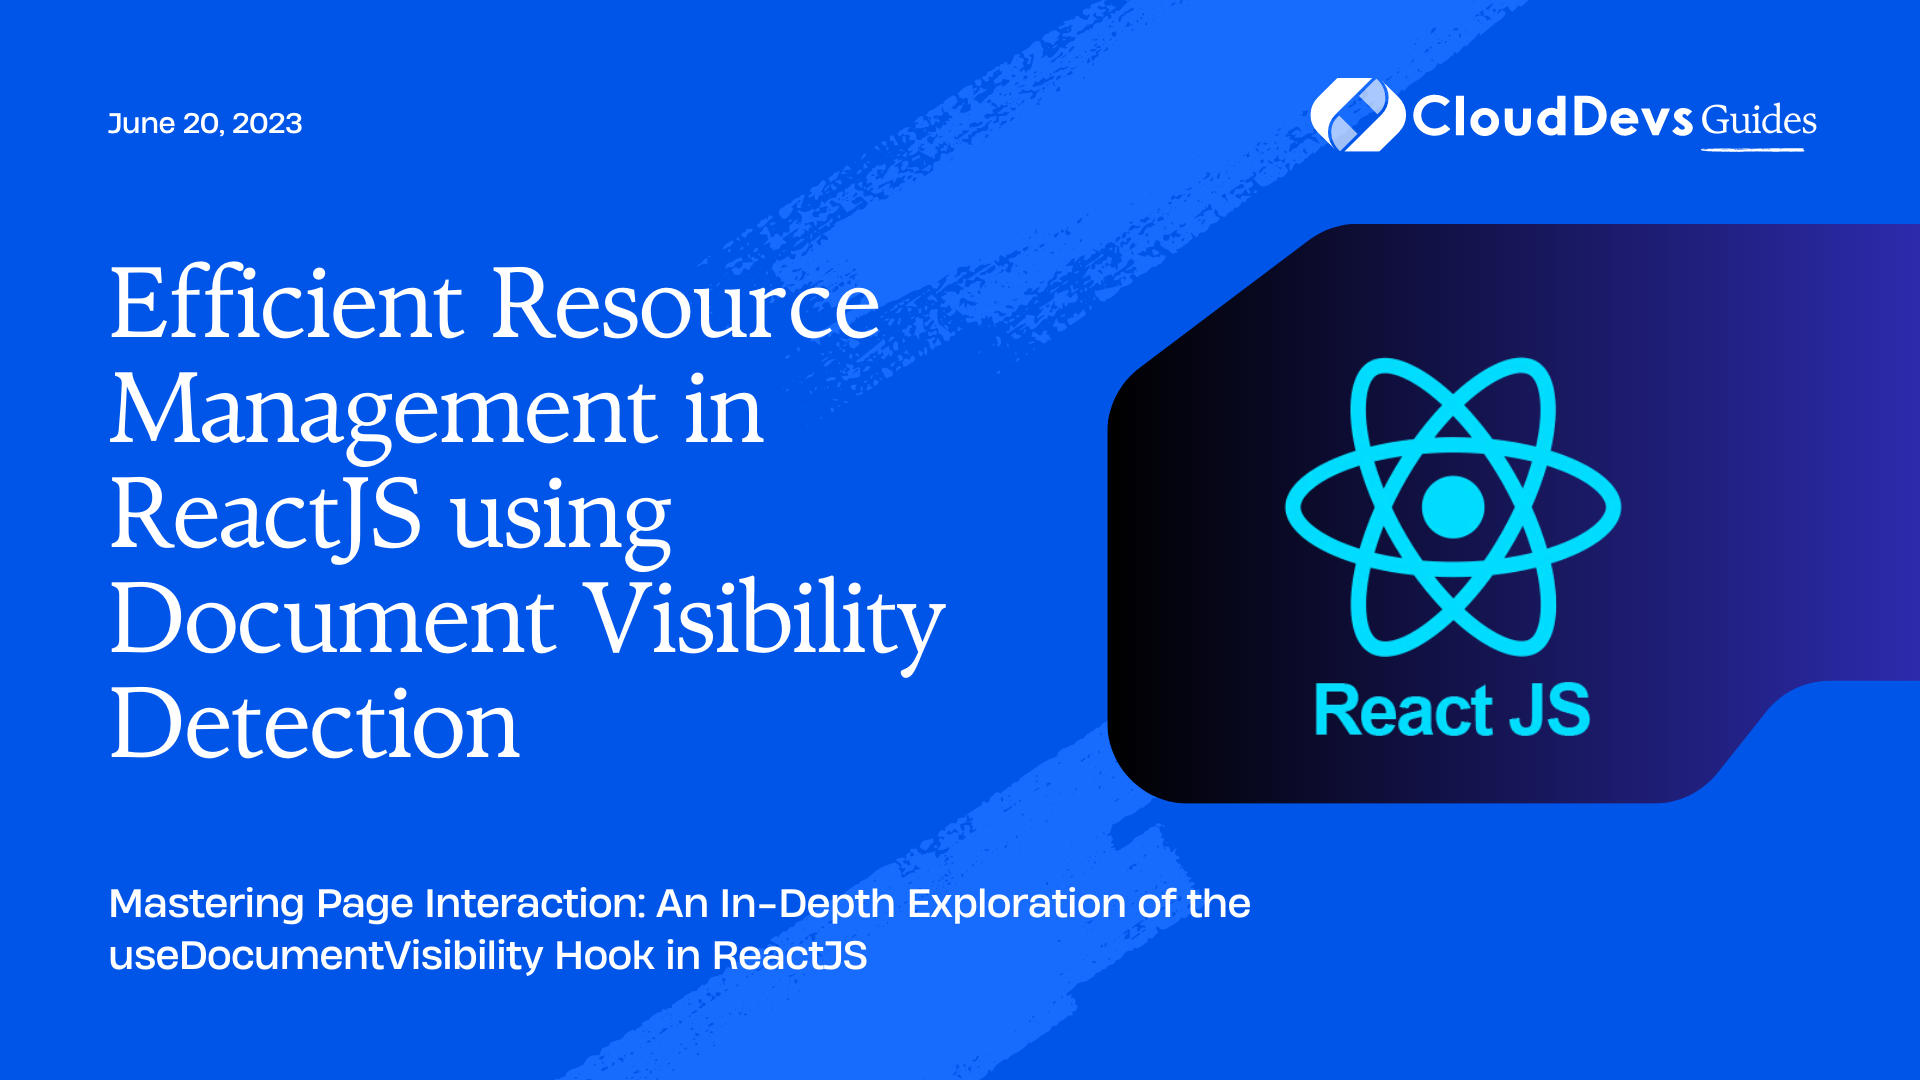 Efficient Resource Management in ReactJS using Document Visibility Detection